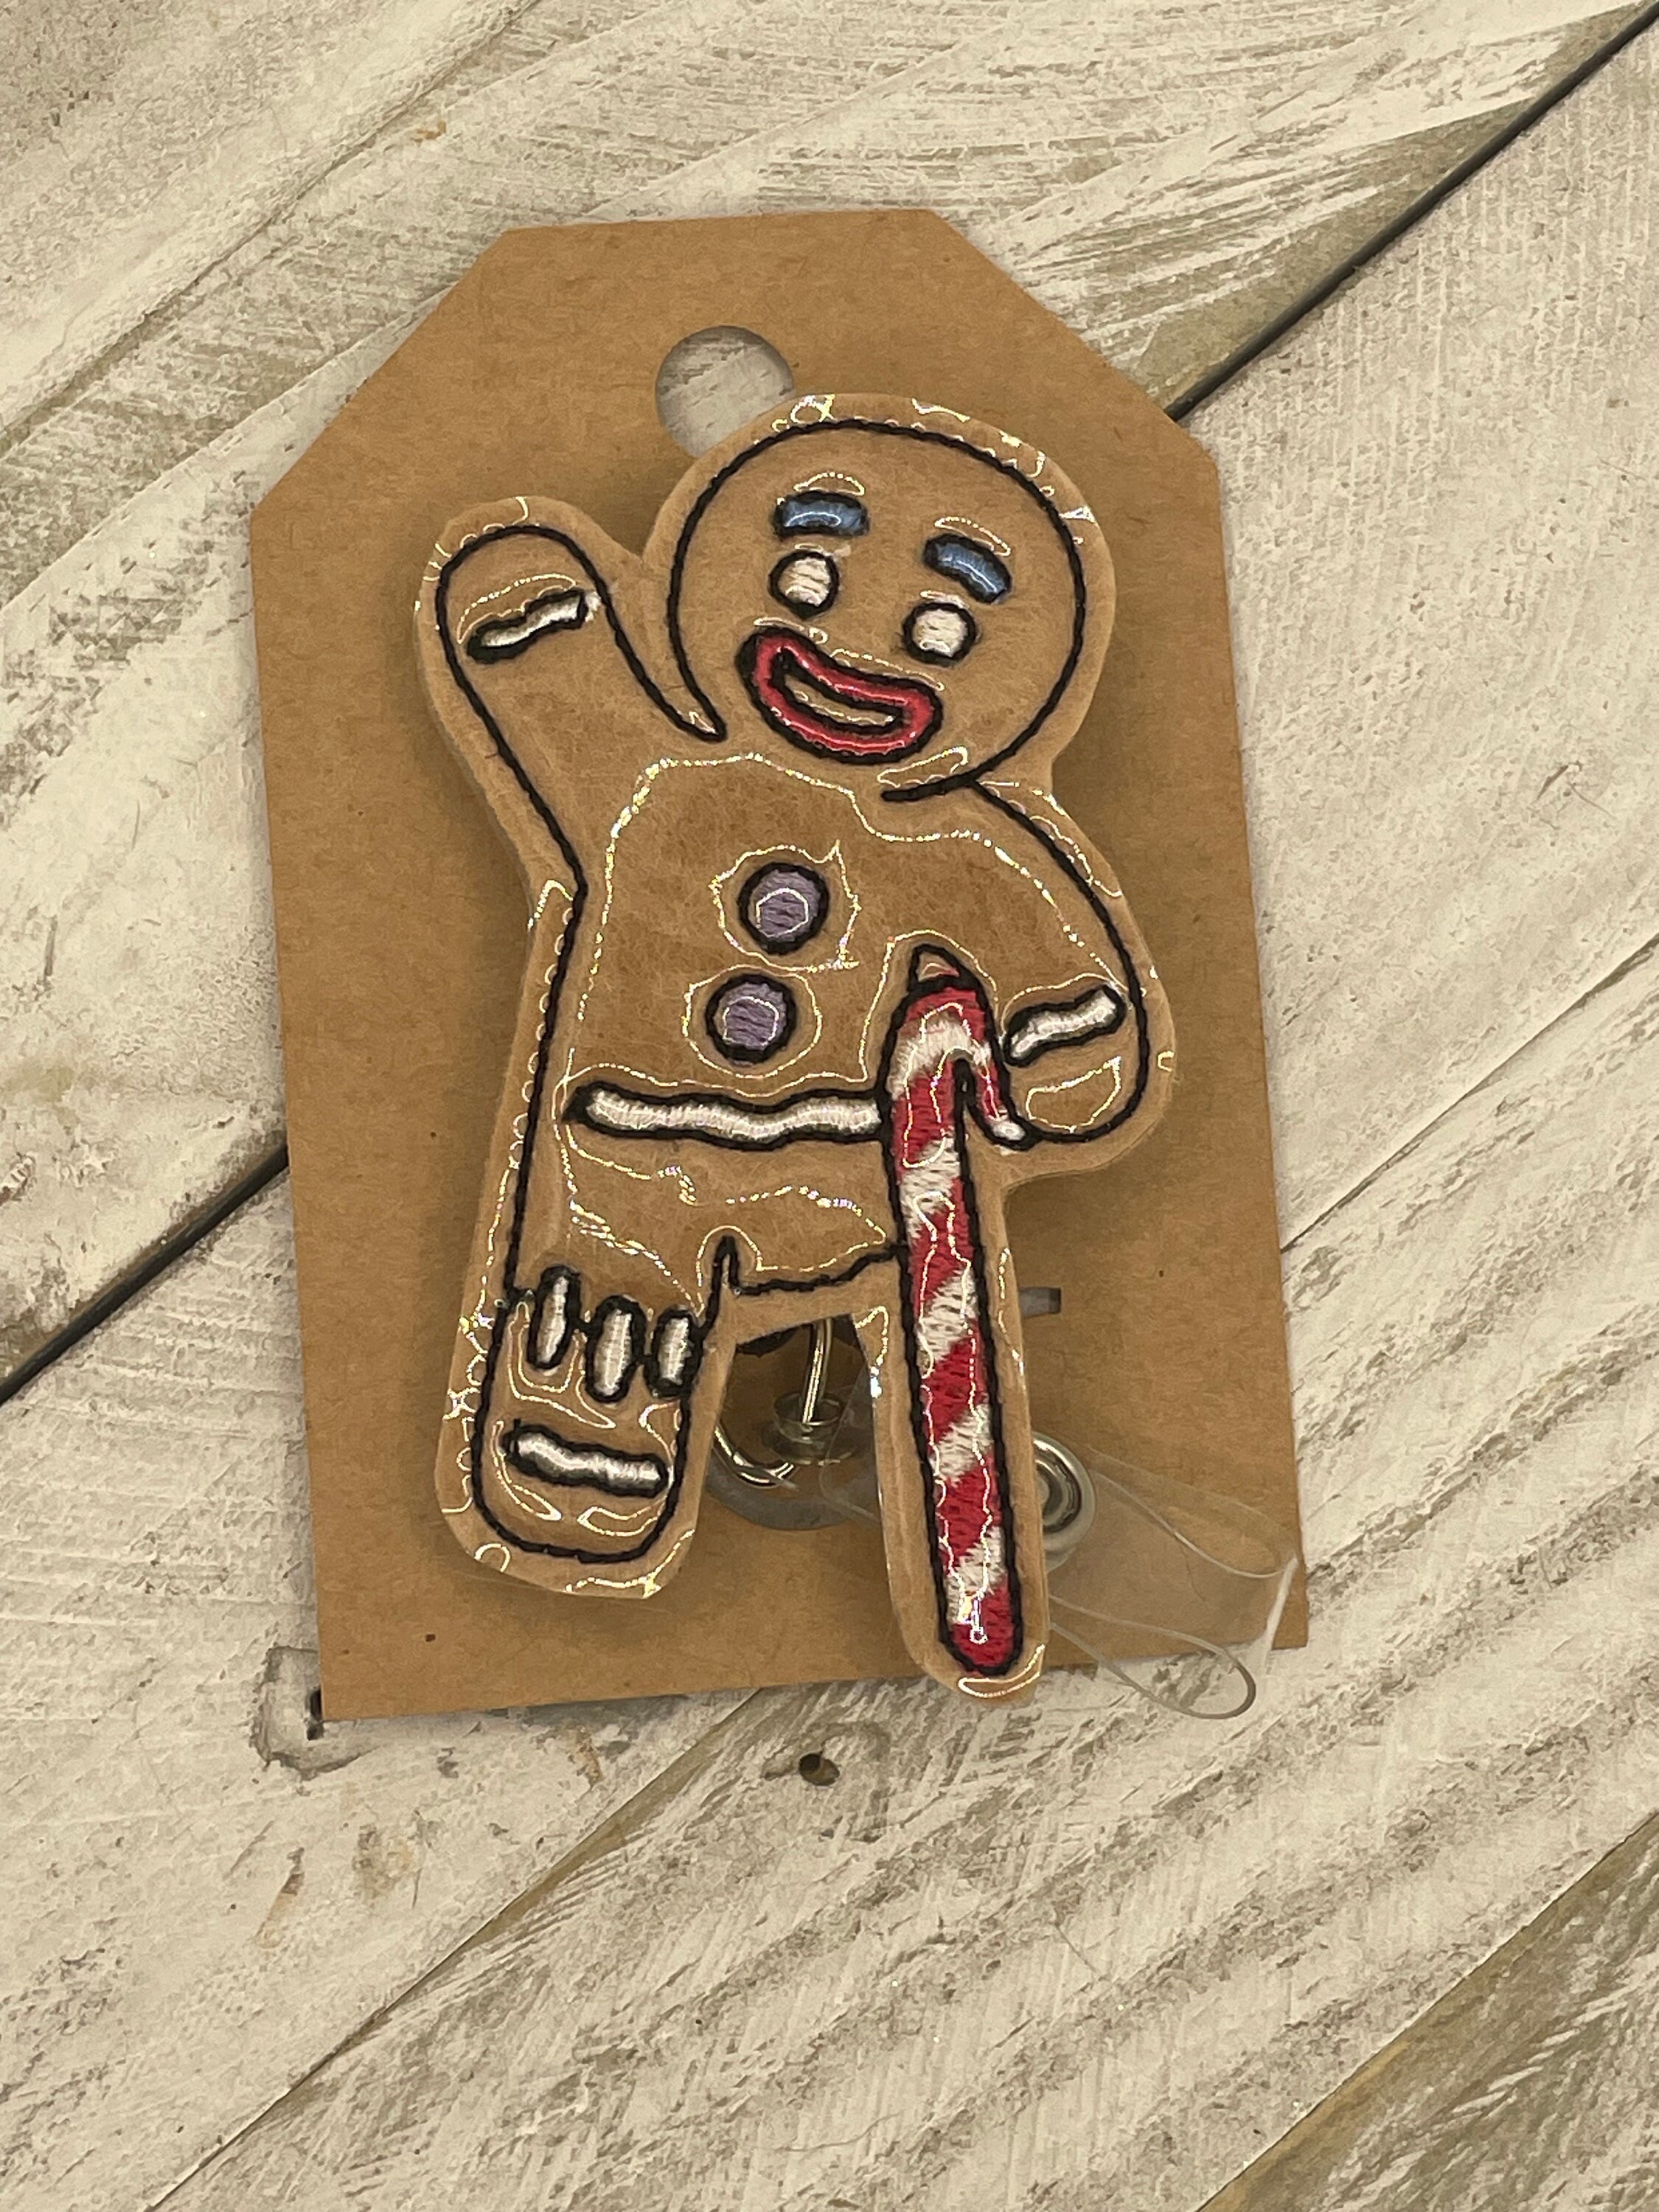 Gingy's Metal Keychain Streamer Item Series 